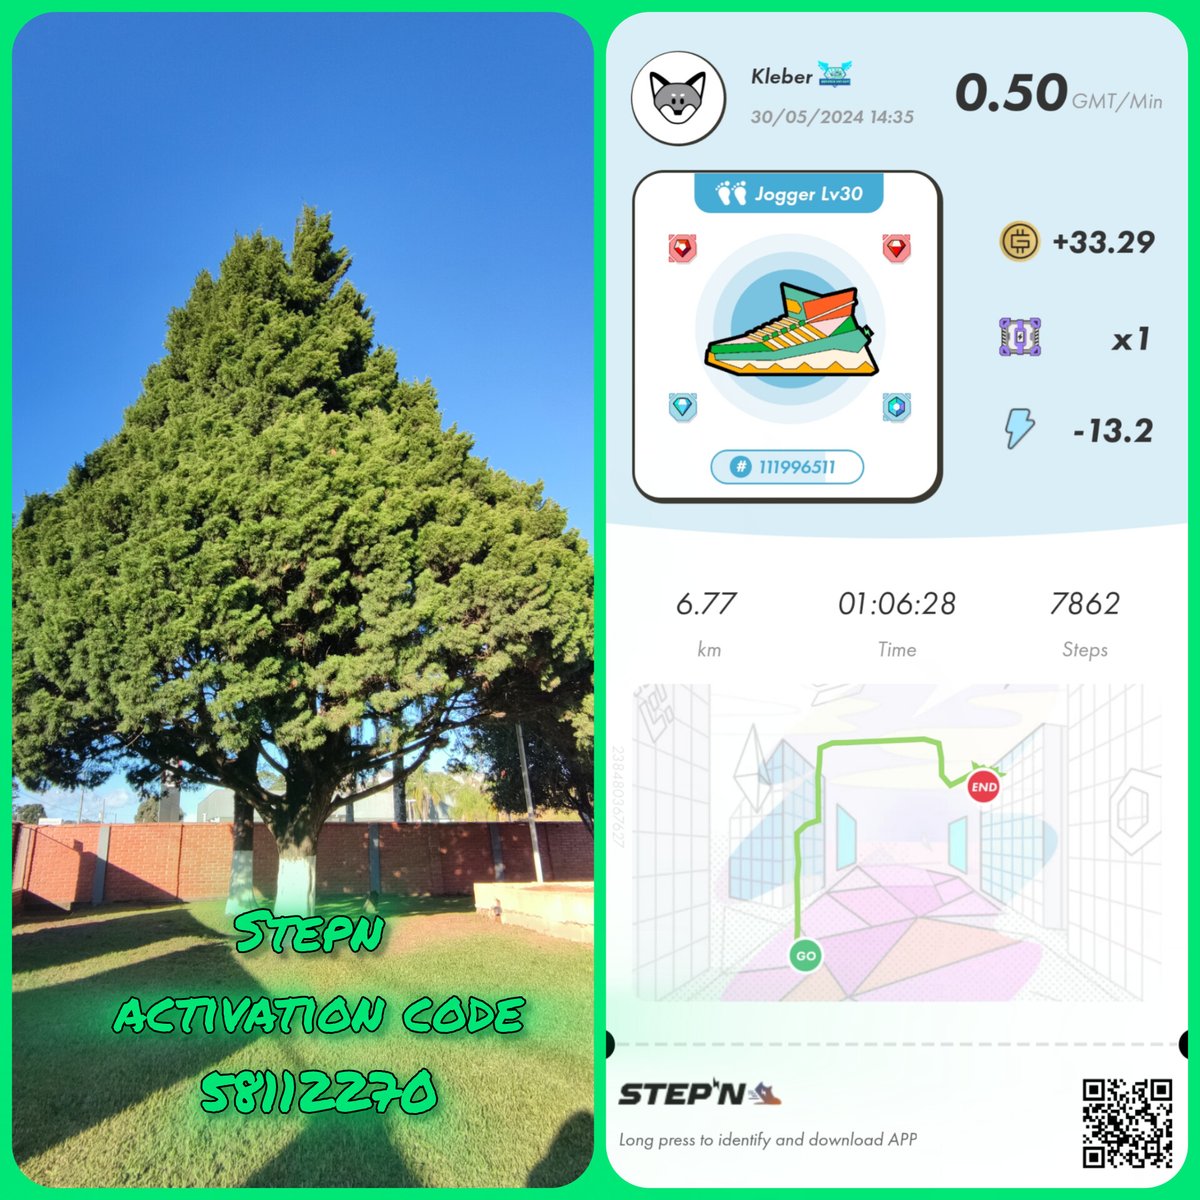 Day 1️⃣3️⃣ of my running training:

🏃🏻‍♂️ Run for 2km, walk for 1km and run for 2km ⚡⚡👟👟

☕ Left some energies behind to go for a walk tomorrow morning 🚶🏻‍♂️

💰 Daily earnings: 33 GMT ($7,70)
⚡ Activation Code to join STEPN: 
58112270

-----------

STEPN Challenge, Day 61: 1547km